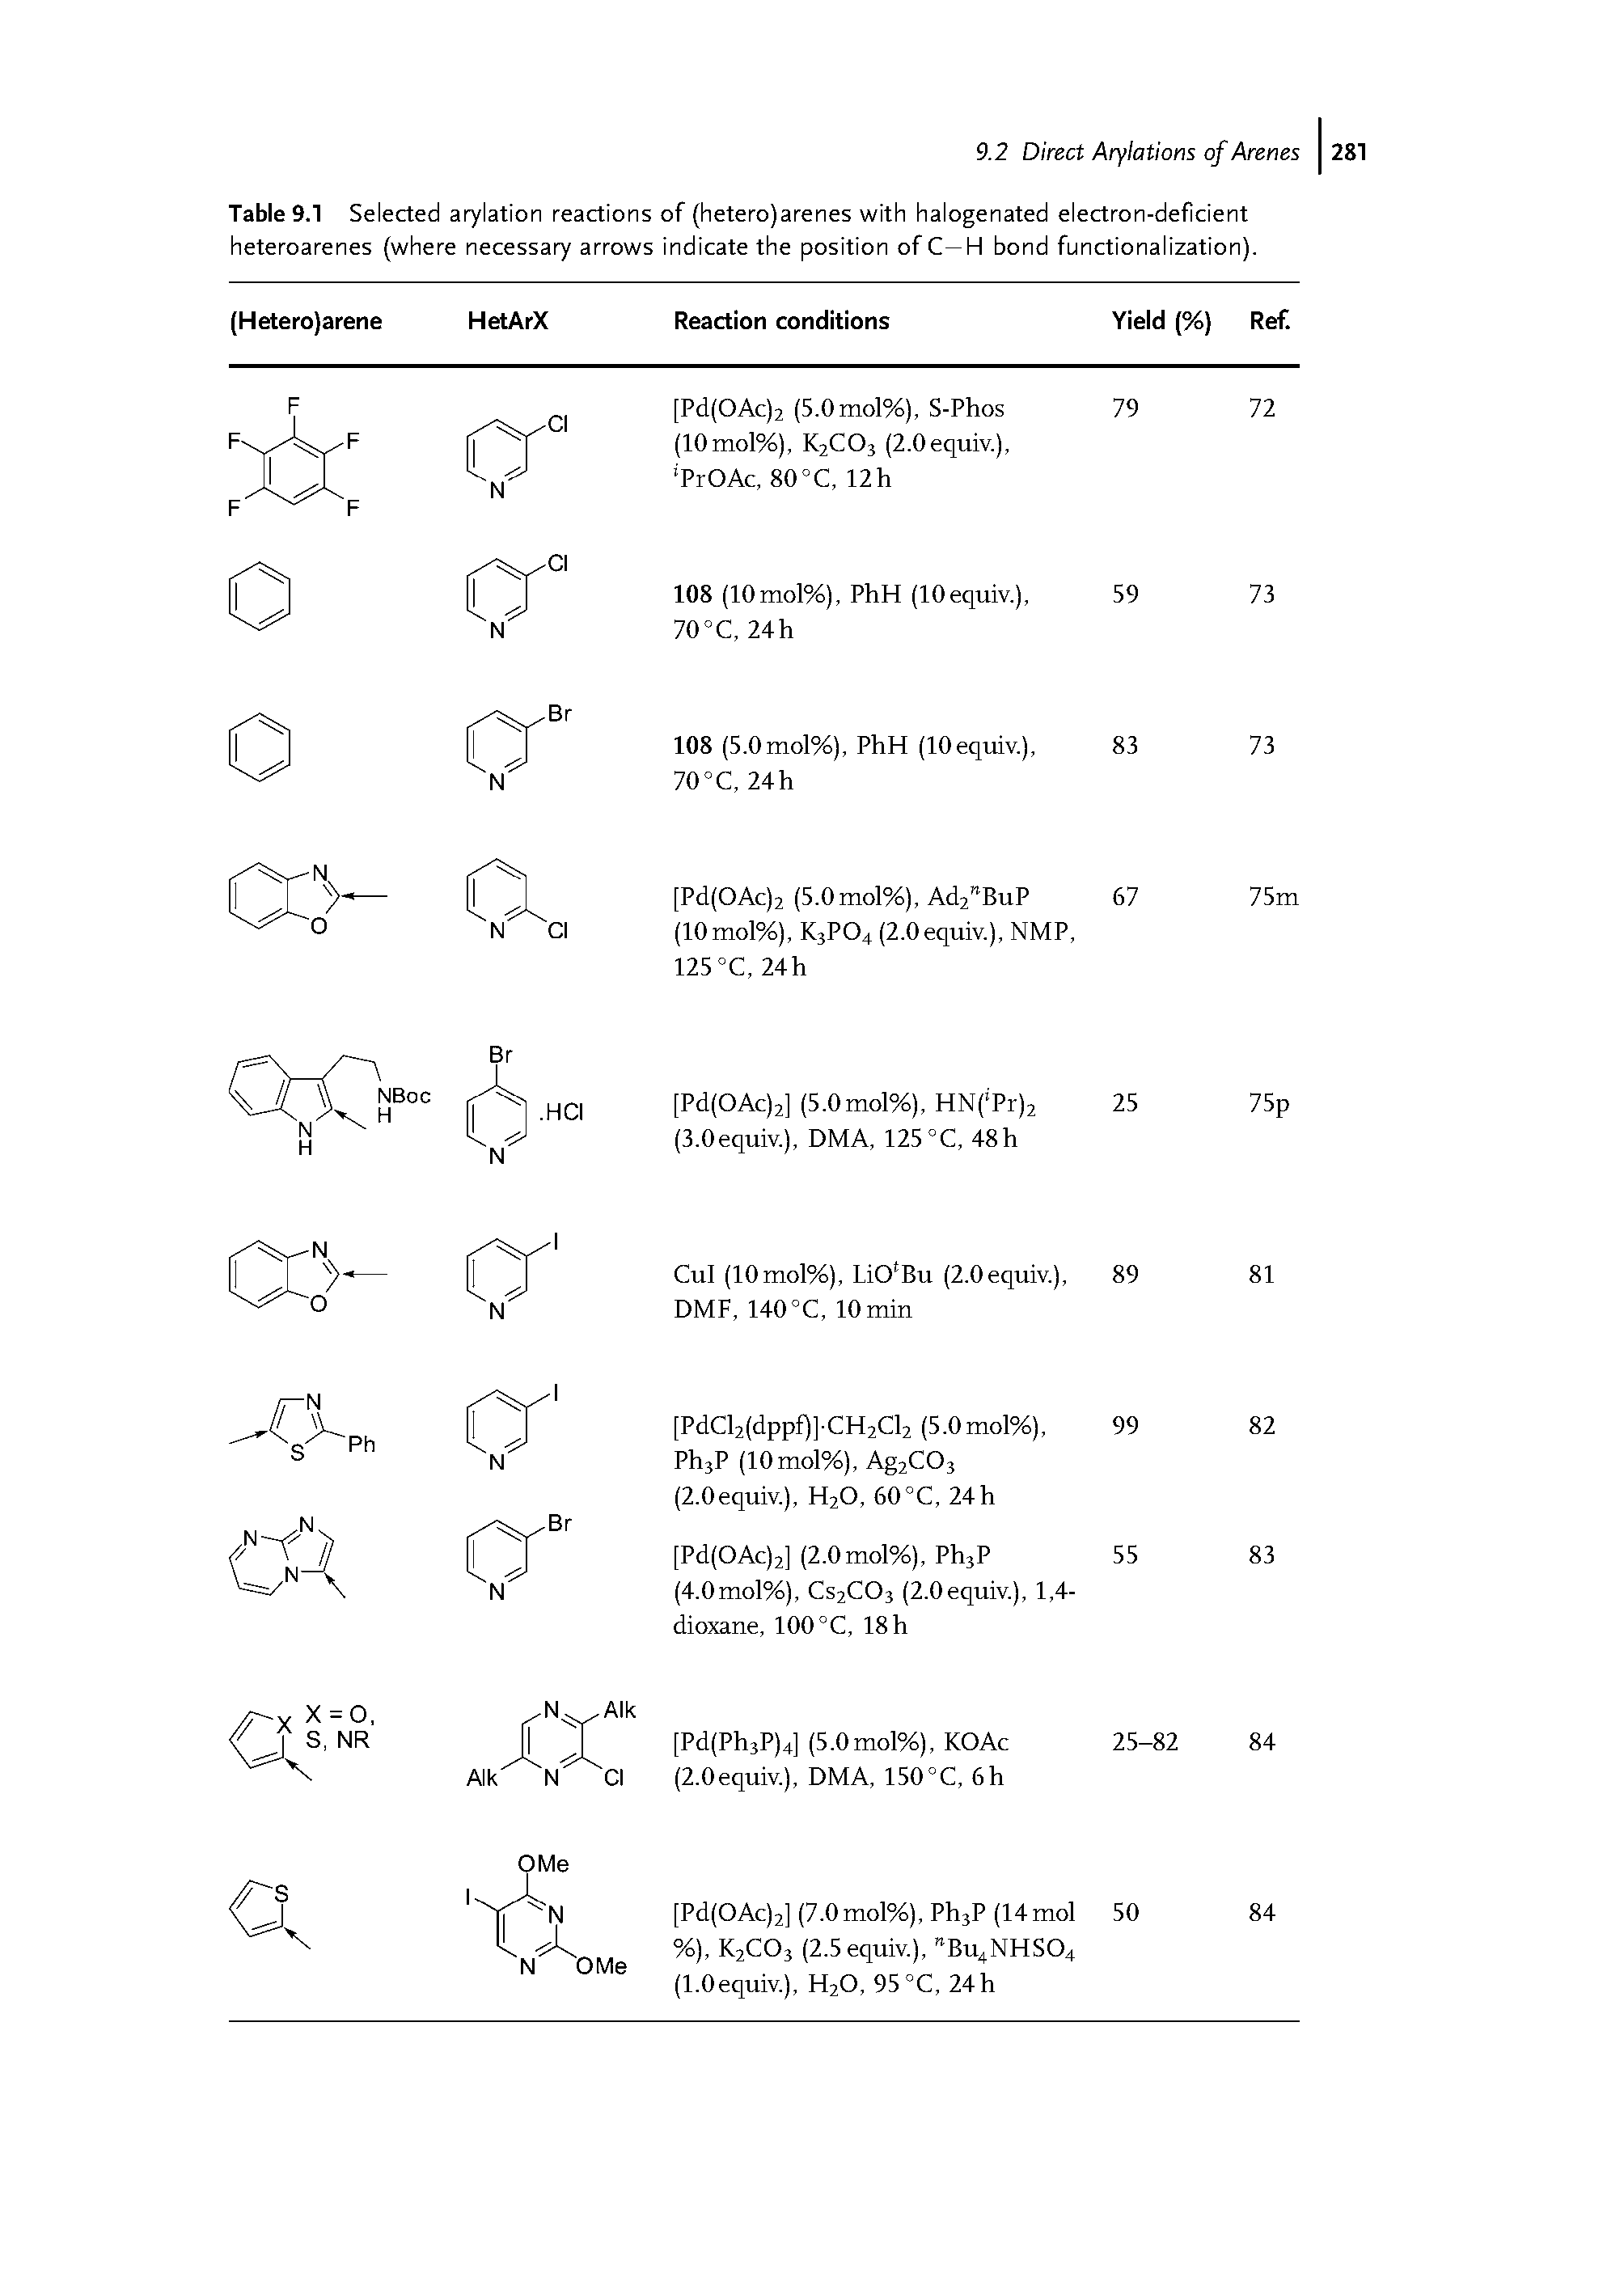 Table 9.1 Selected arylation reactions of (hetero)arenes with halogenated electron-deficient heteroarenes (where necessary arrows indicate the position of C—H bond functionalization).